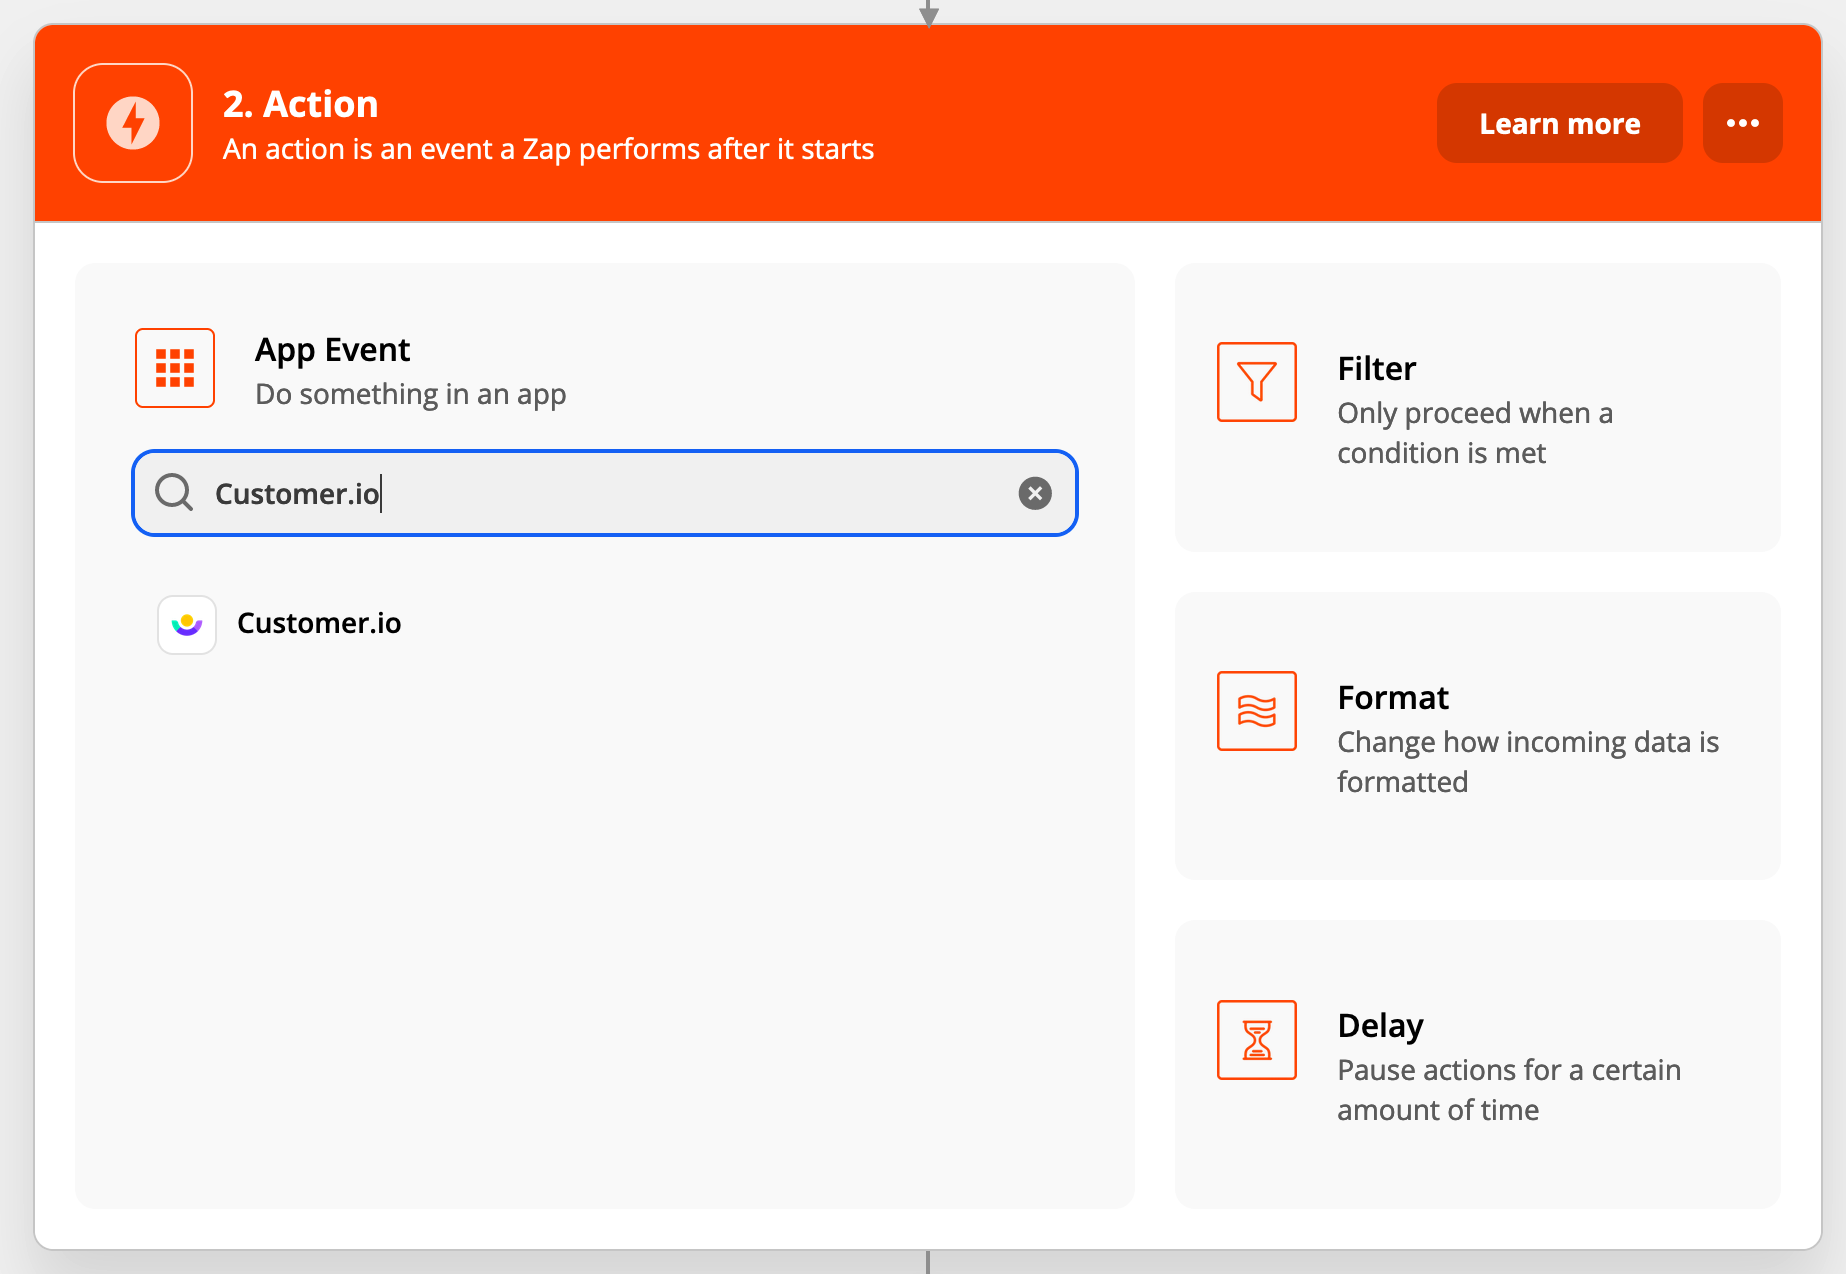 Step 4 of the Zapier integration: Select Customer.io for the App Event